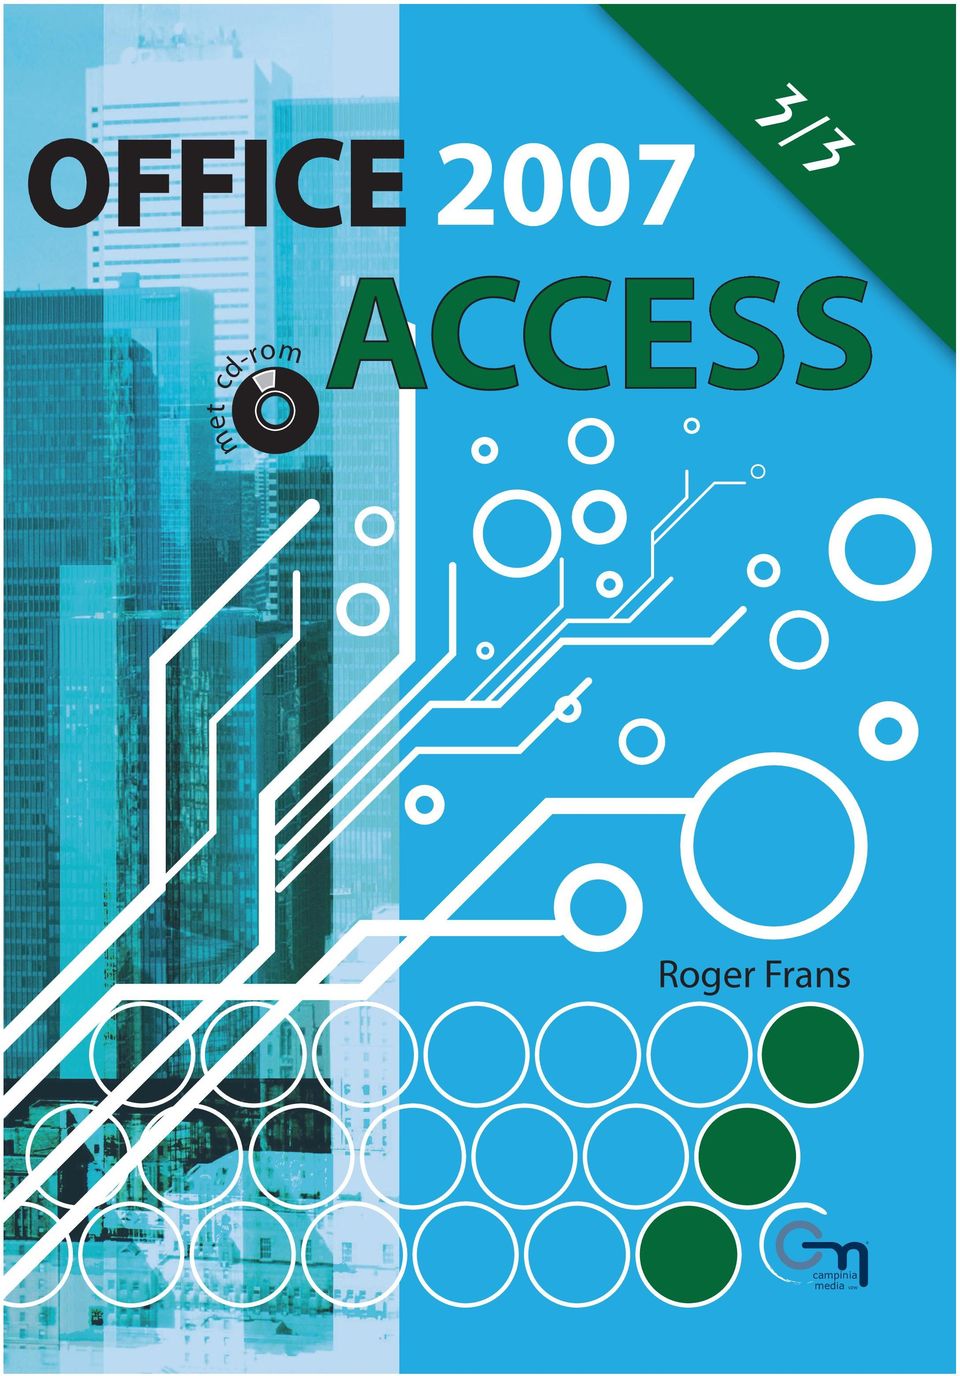 ACCESS Roger